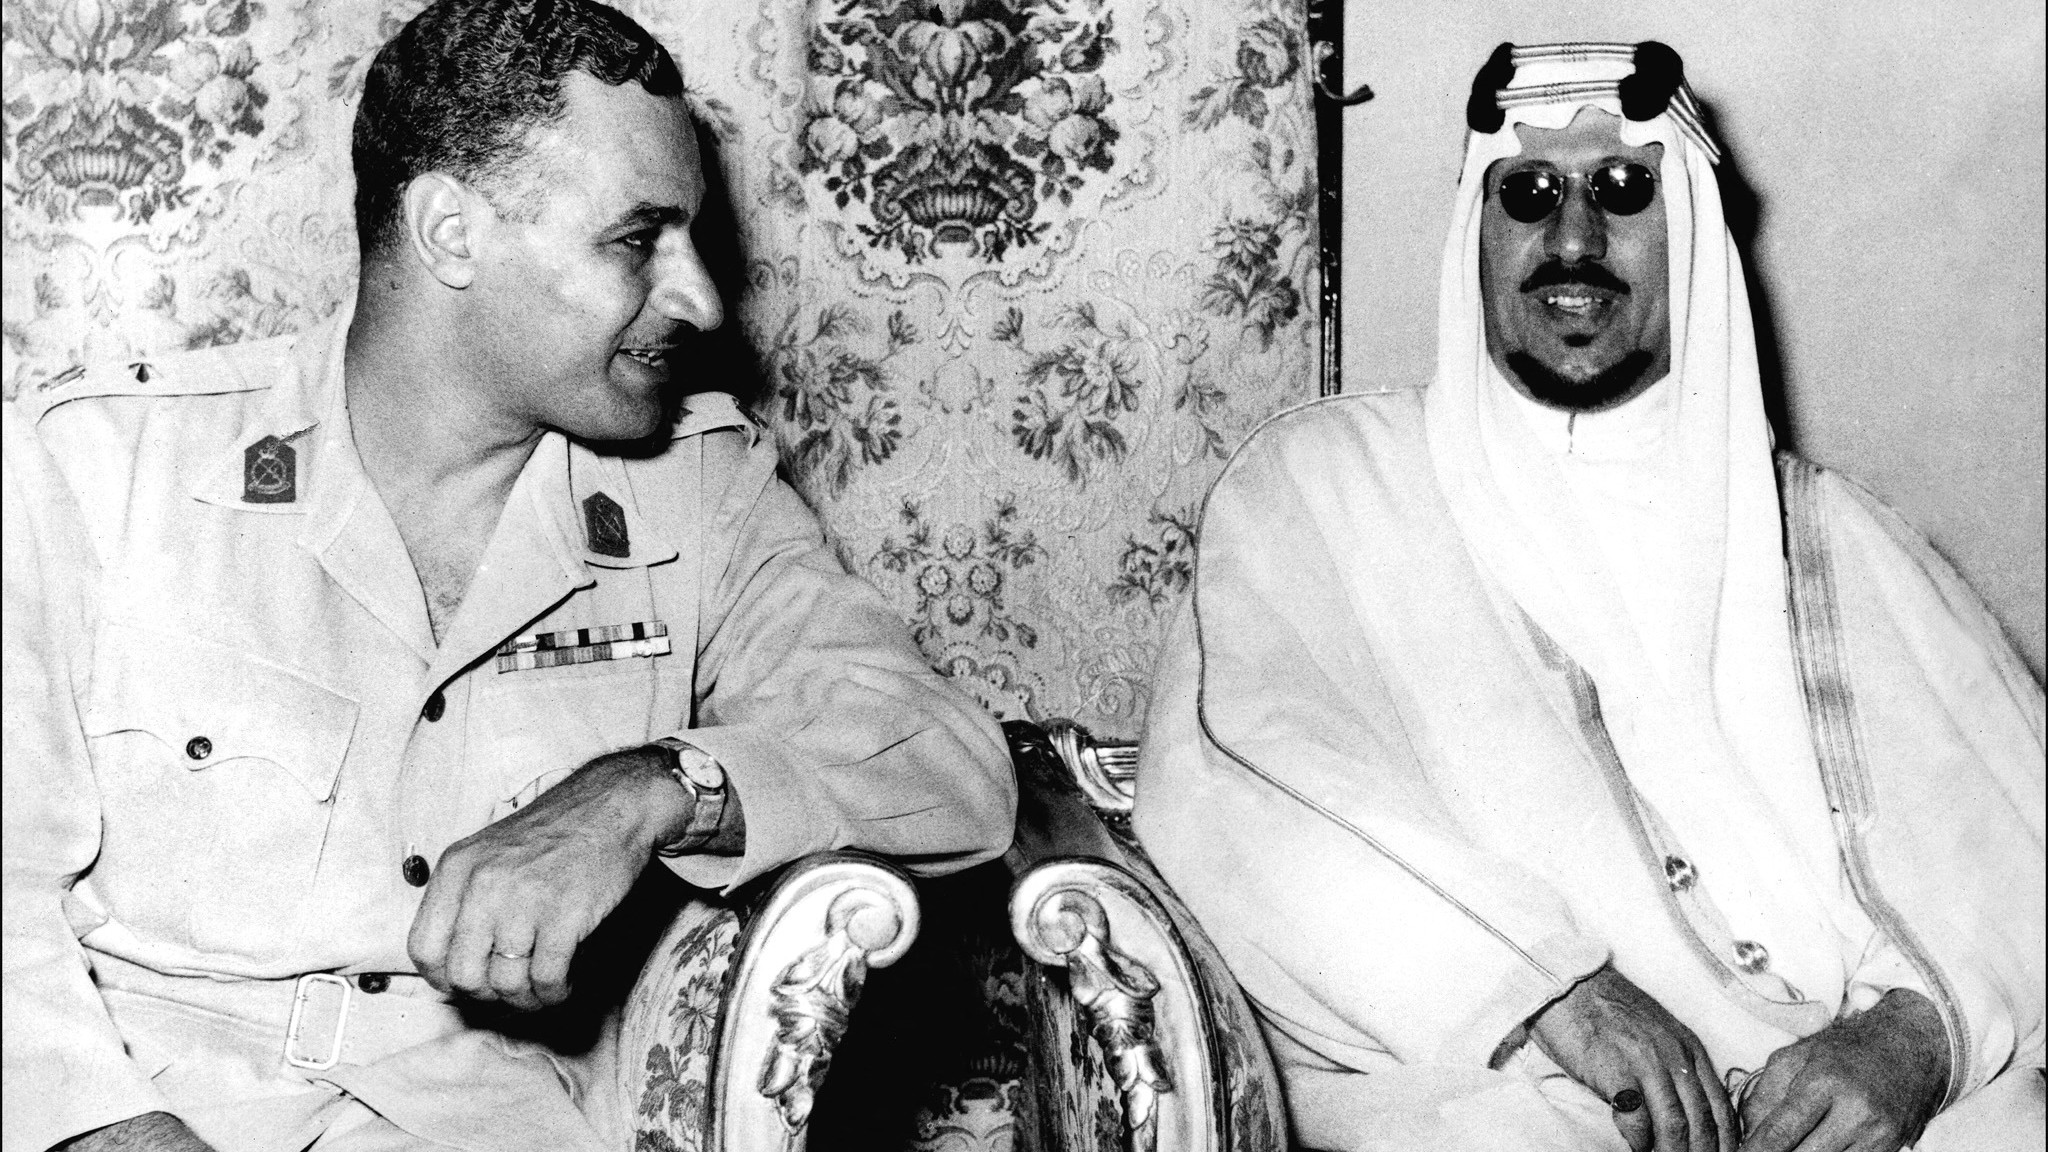 Saudi Arabia King Saud ibn Abd al-Aziz (R) and Egyptian president Gamal Abdel Nasser confer in March 1956 at Kubbeh Palace in Cairo during Syria-Saudi Arabia and Egypt meeting. Saud ibn Abd al-Aziz succeeded his father King Ibn Saud in November 1953.